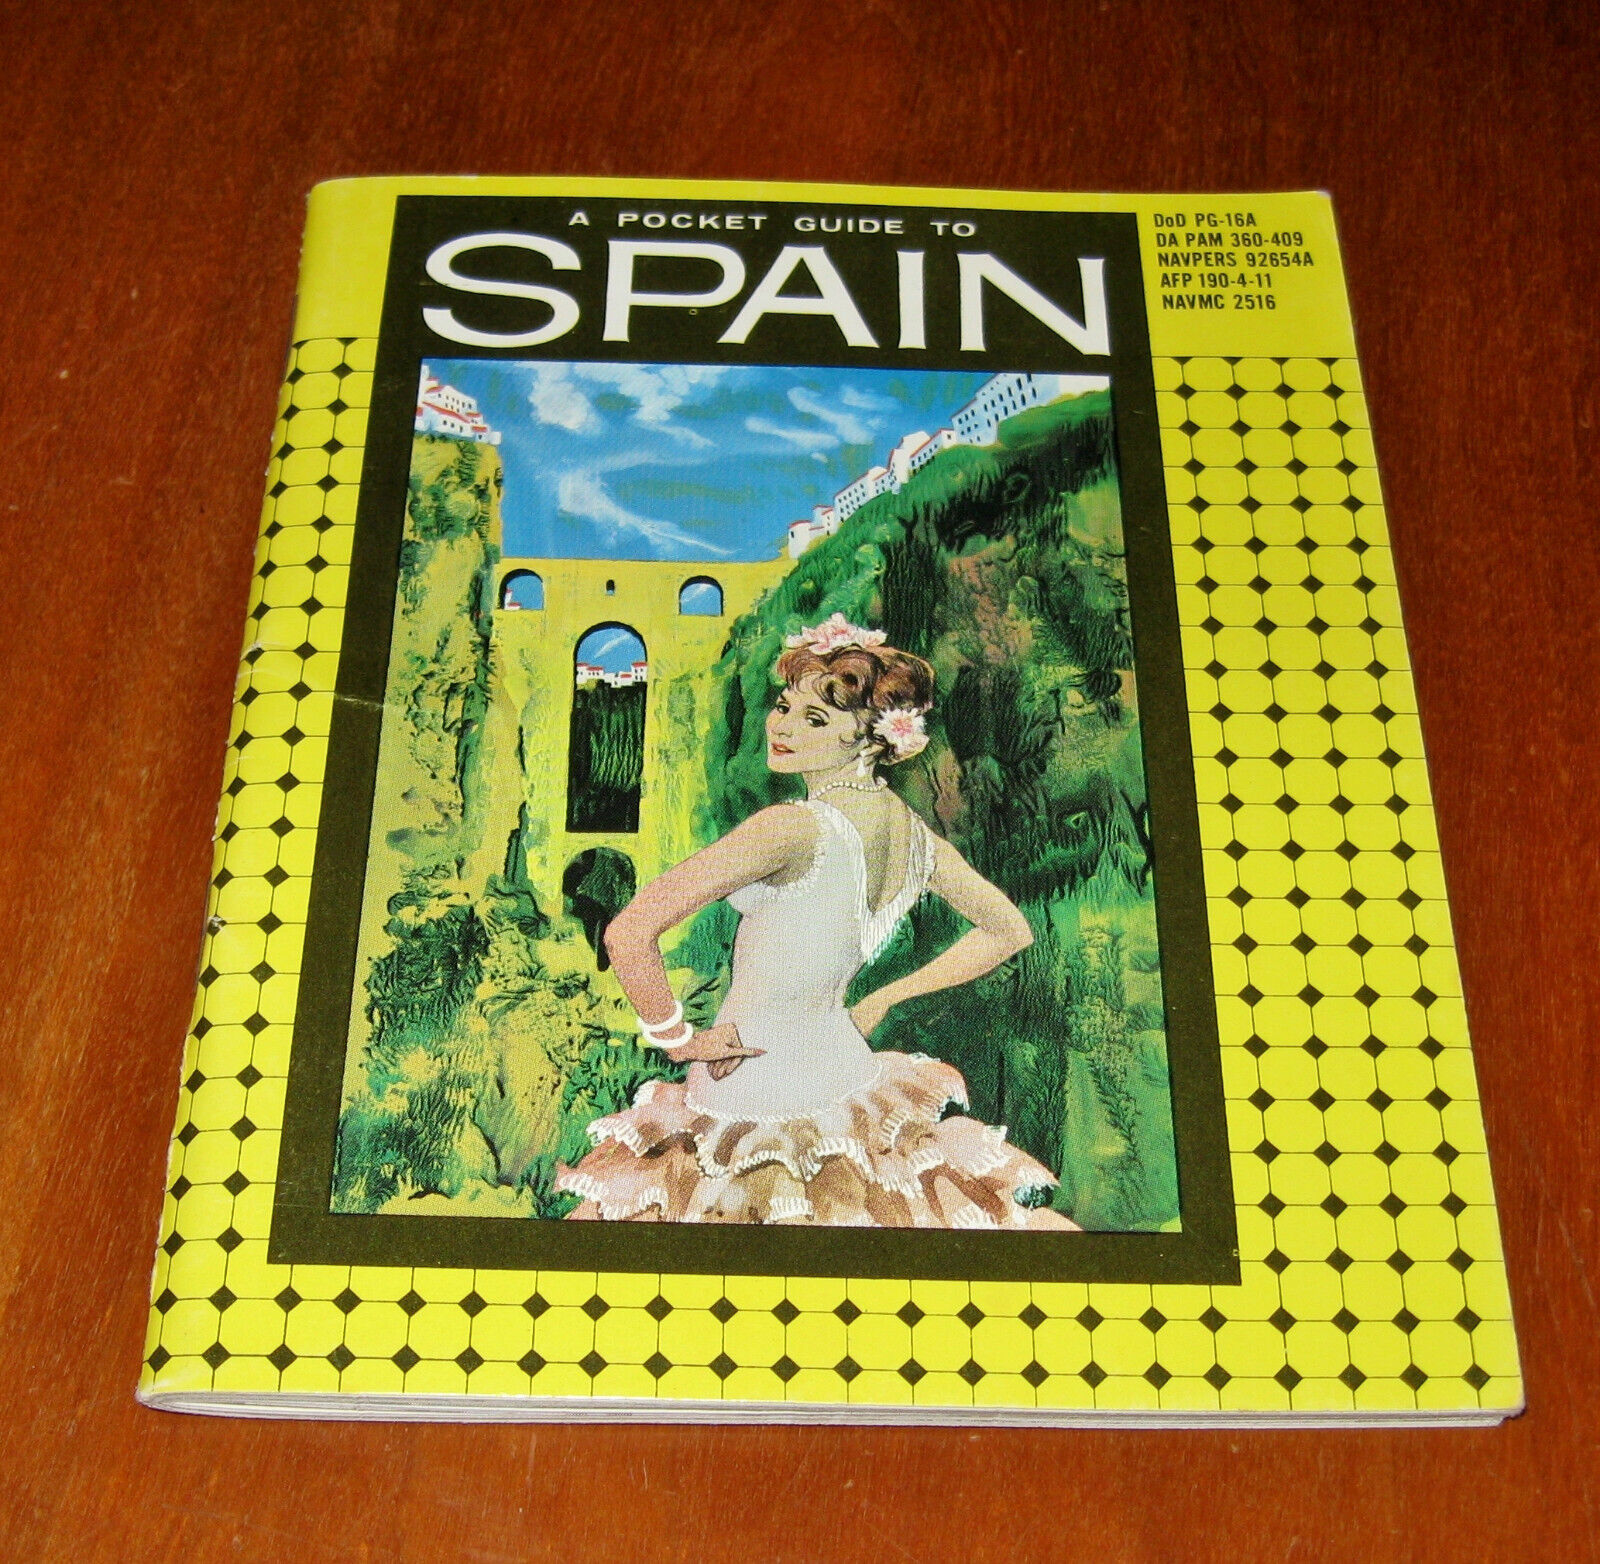 Vintage US Military Guide to Spain US Dept of Defense Armed Forces Education